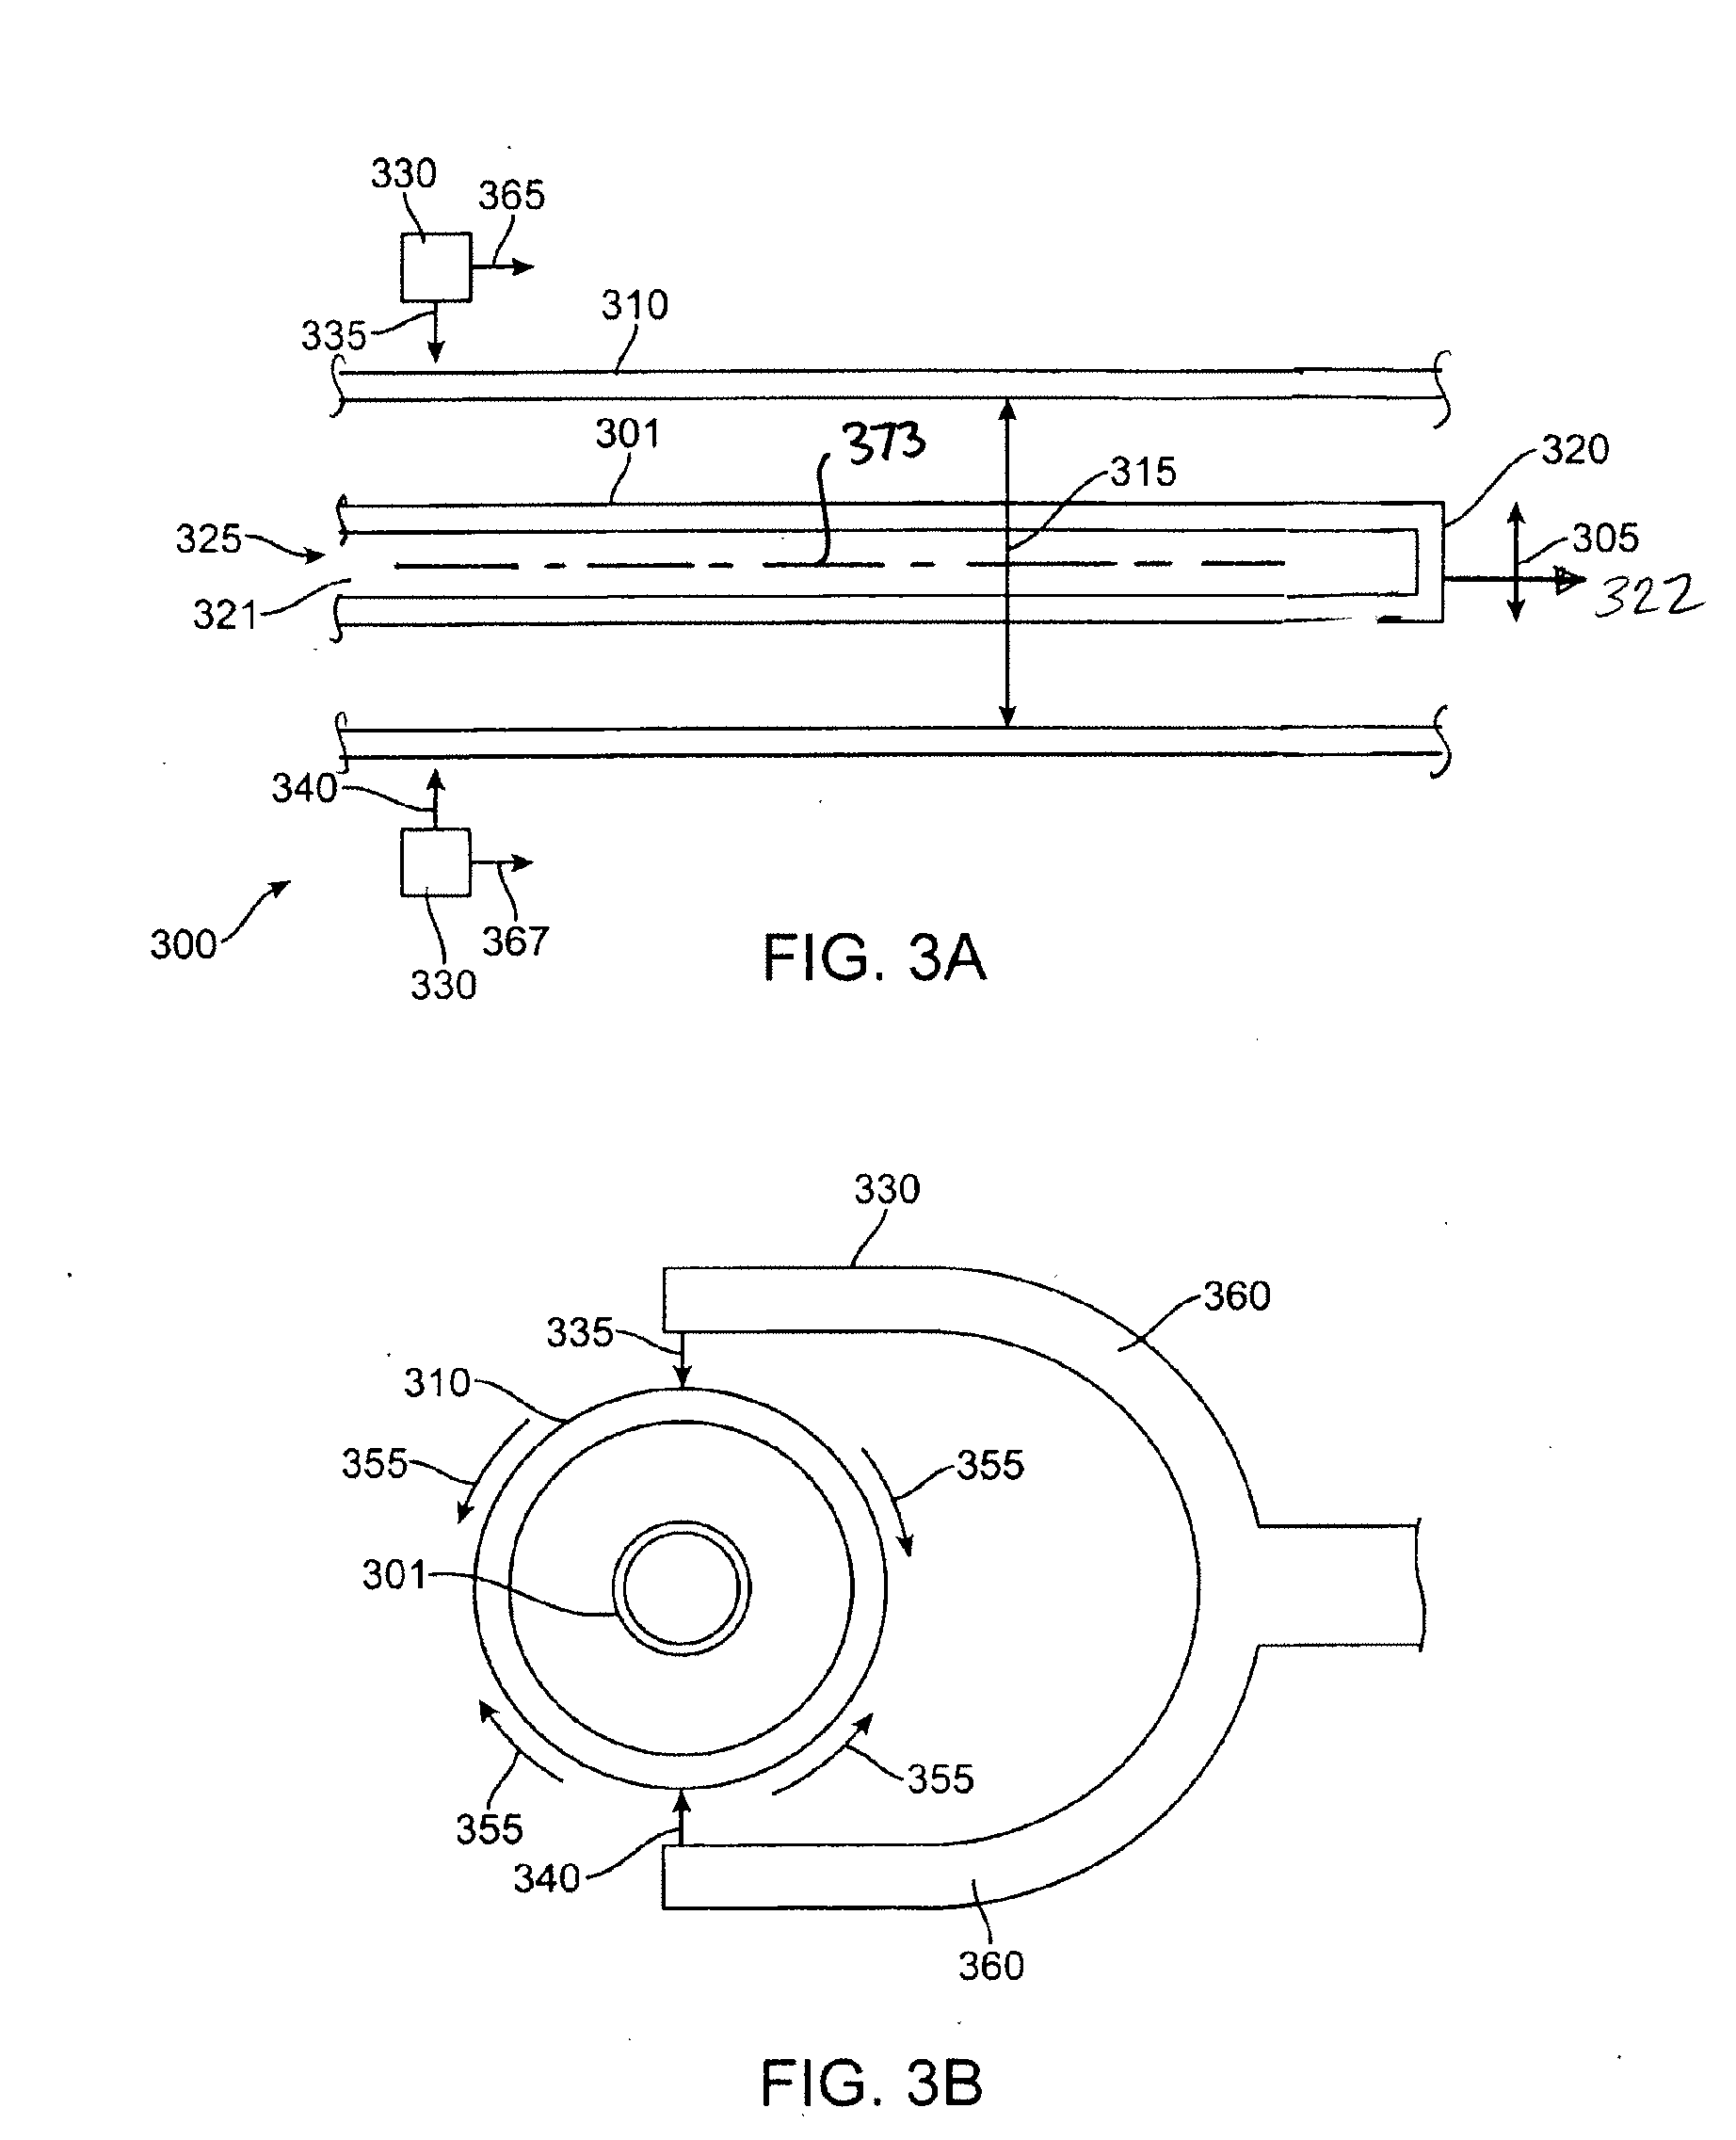 Polymeric Stent and Method of Making Same